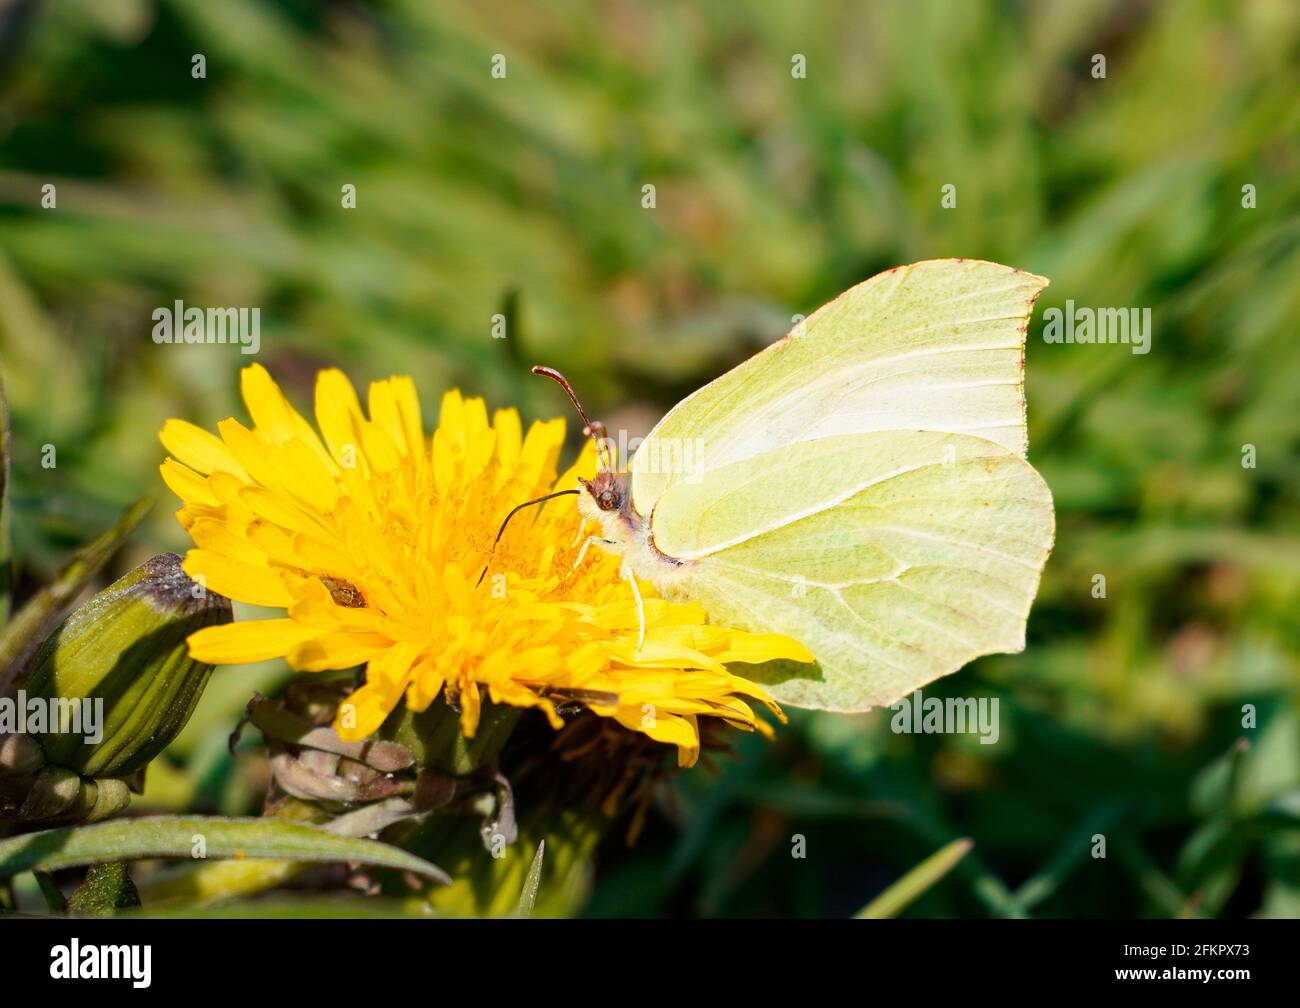 A brimstone butterfly sits on a yellow dandelion blossom and collects nectar. Green grass in the background. Butterfly with yellow wings. Stock Photo